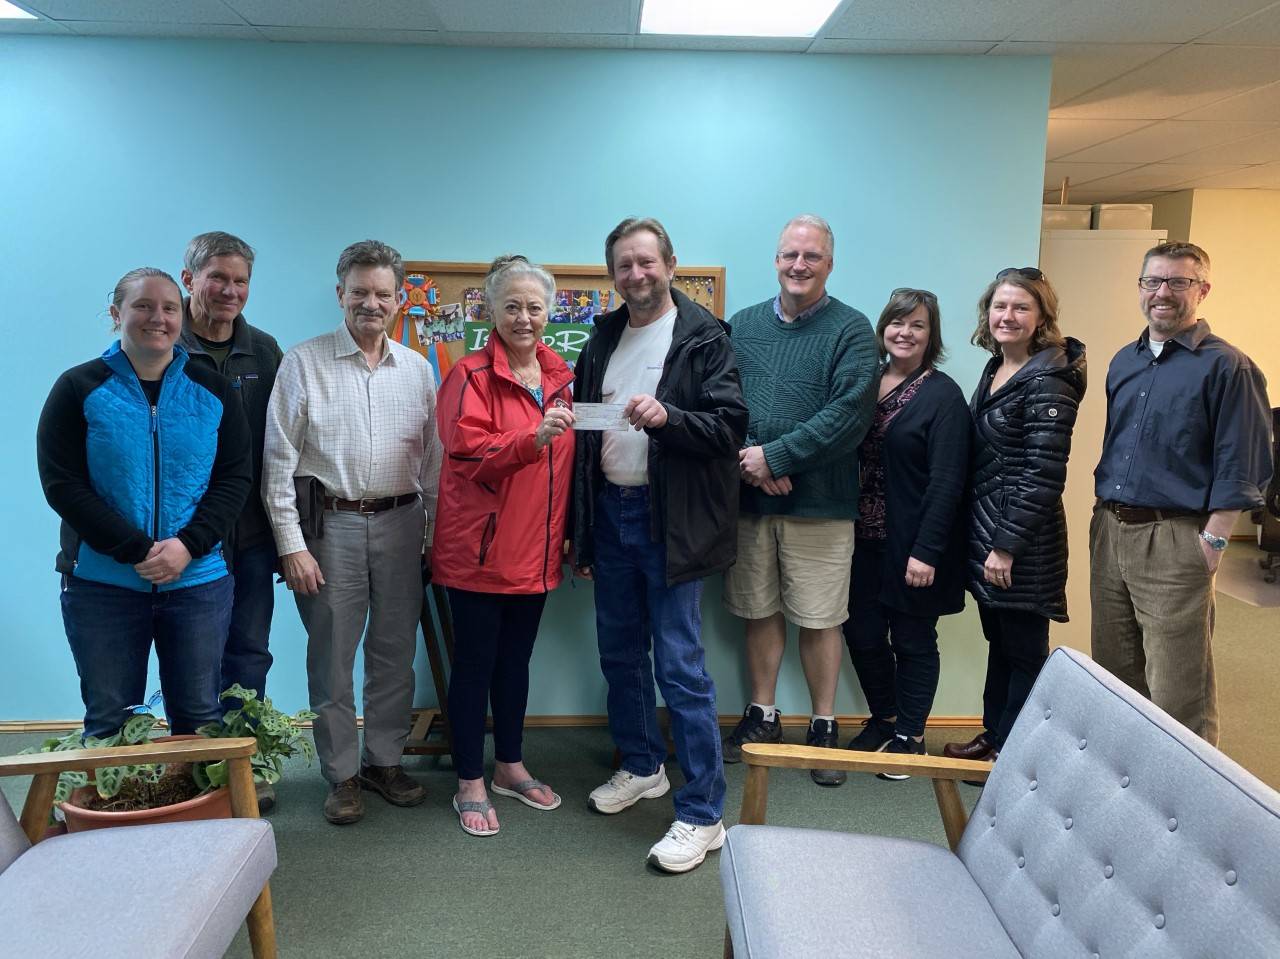 Vicky Thalacker, Friday Harbor Kiwanis Club Past President, presents a check for $500 from FH Kiwanis to David Stegman, FANS President. (Contributed photo.)